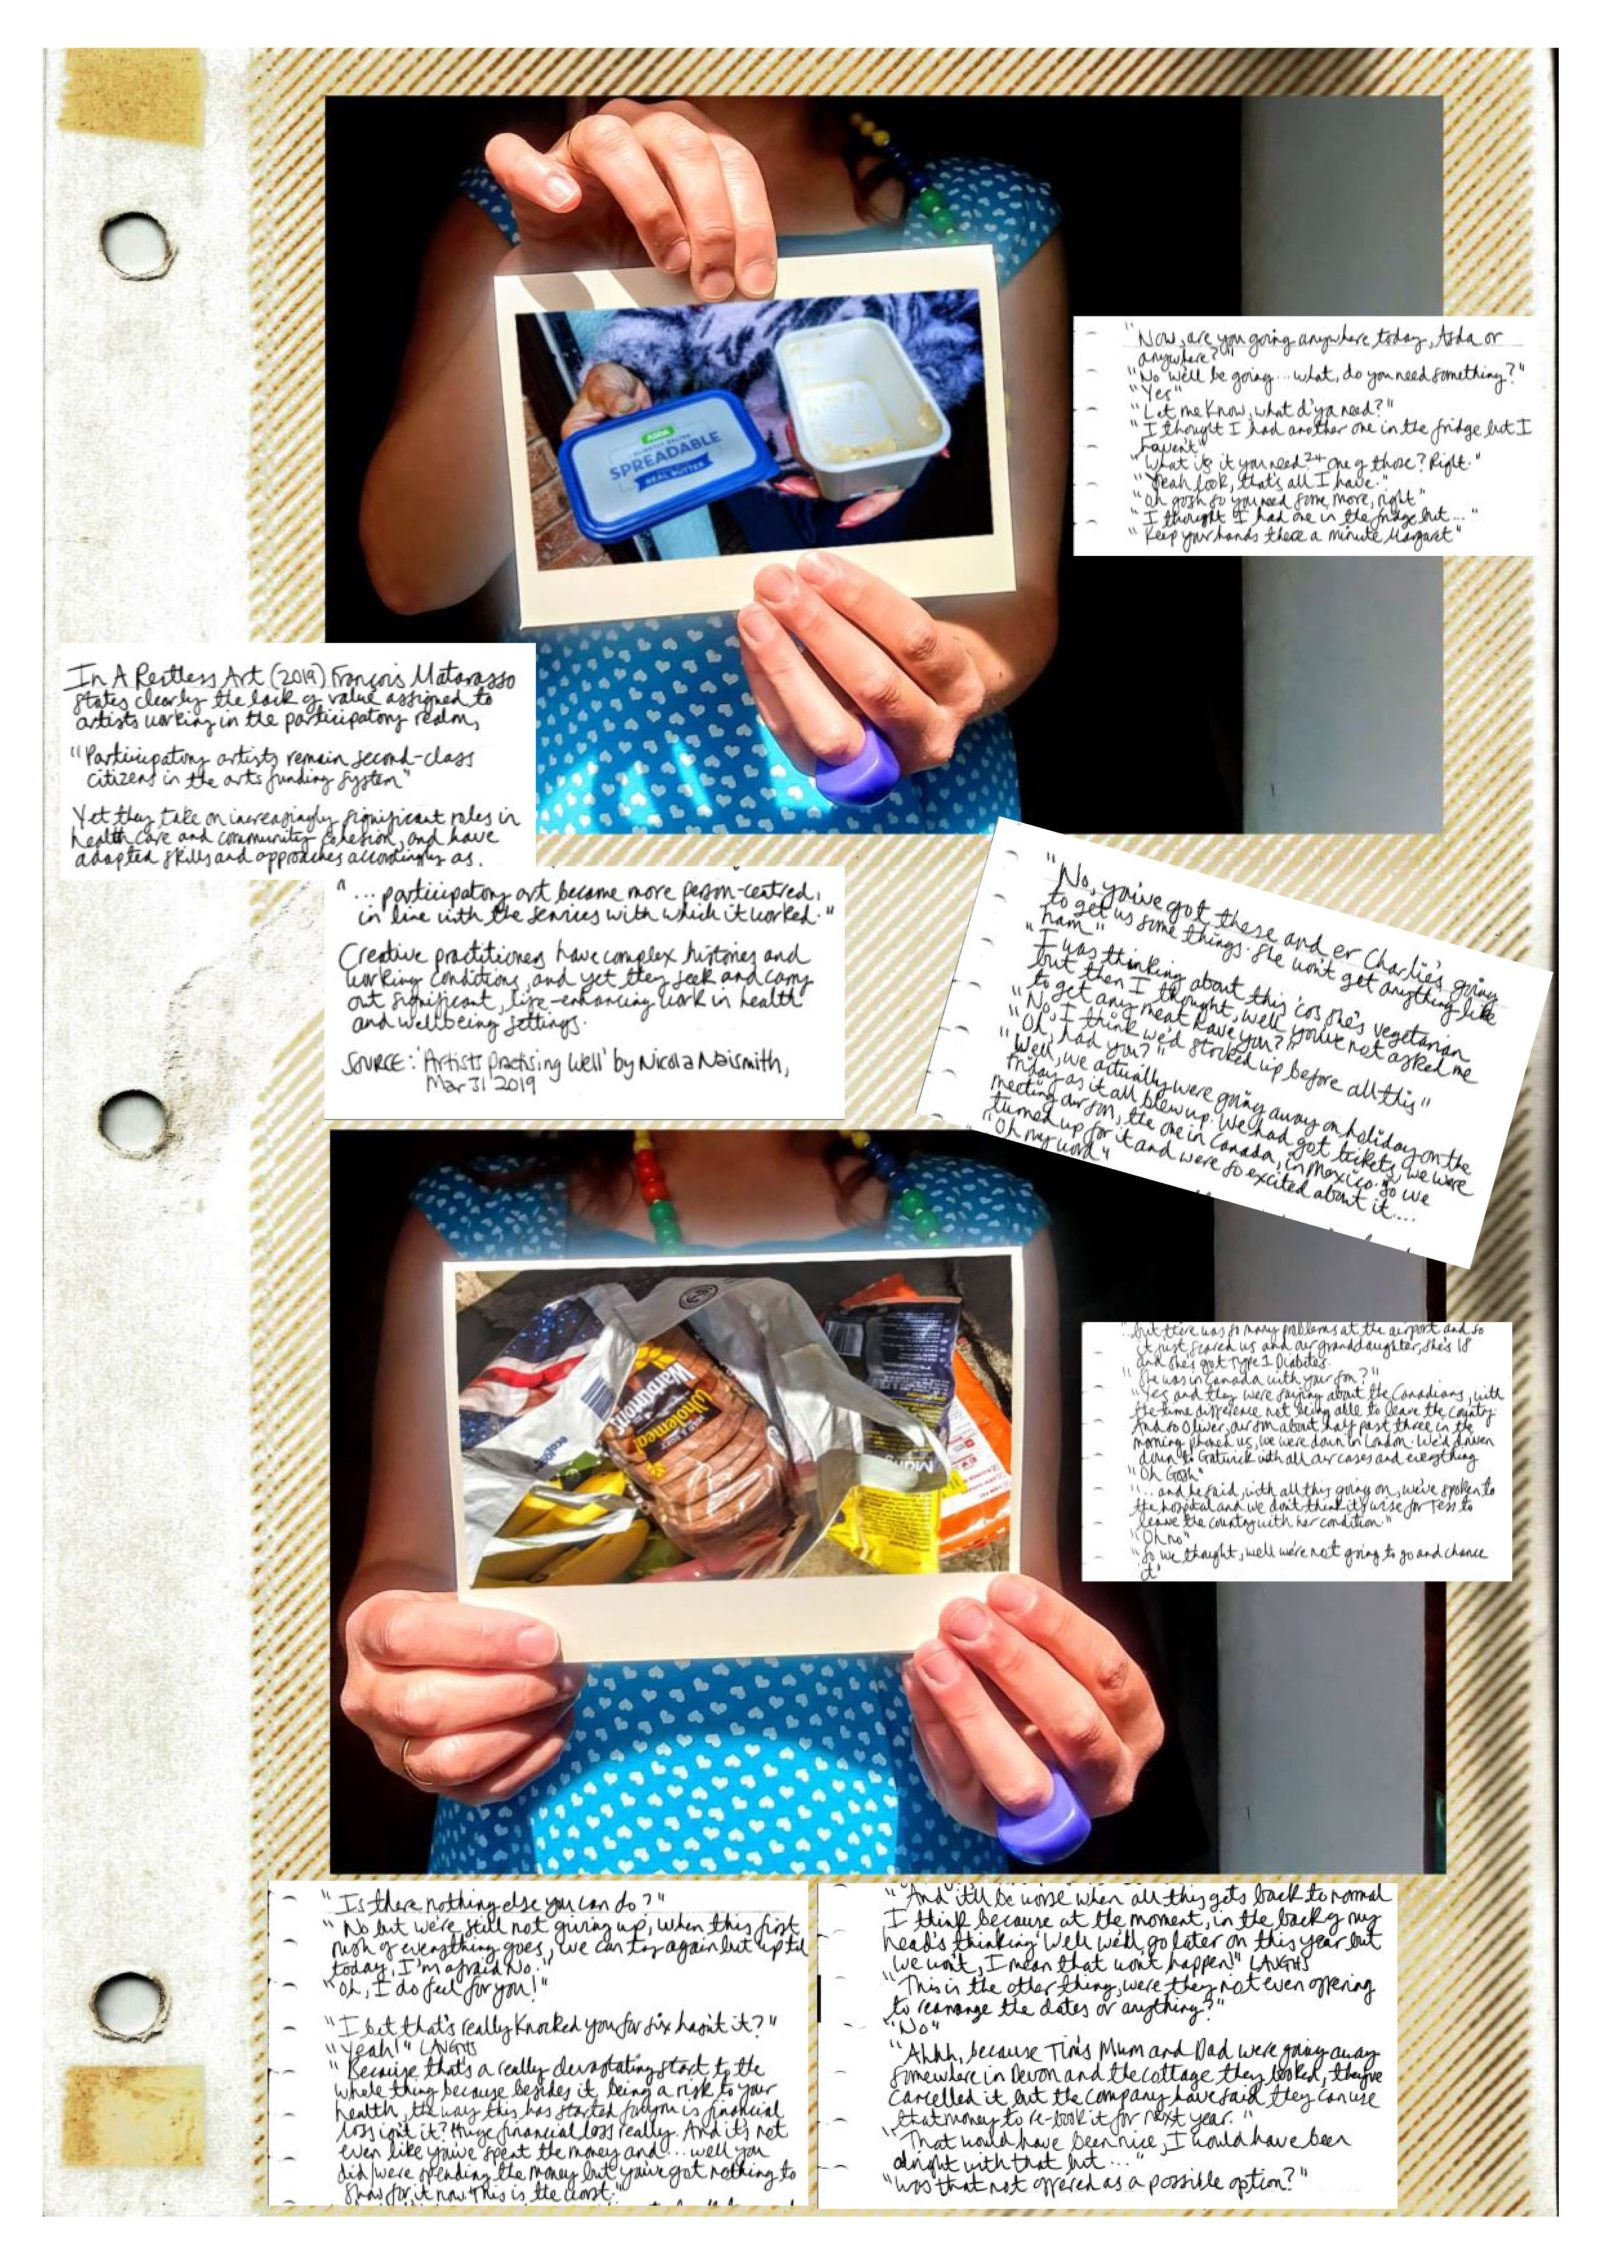 Two hands are clasped around a photograph of a shopping bag full of food and another of an empty pot of margarine. The hands belong to someone in a bright blue dress. Around the images are handwritten messages.